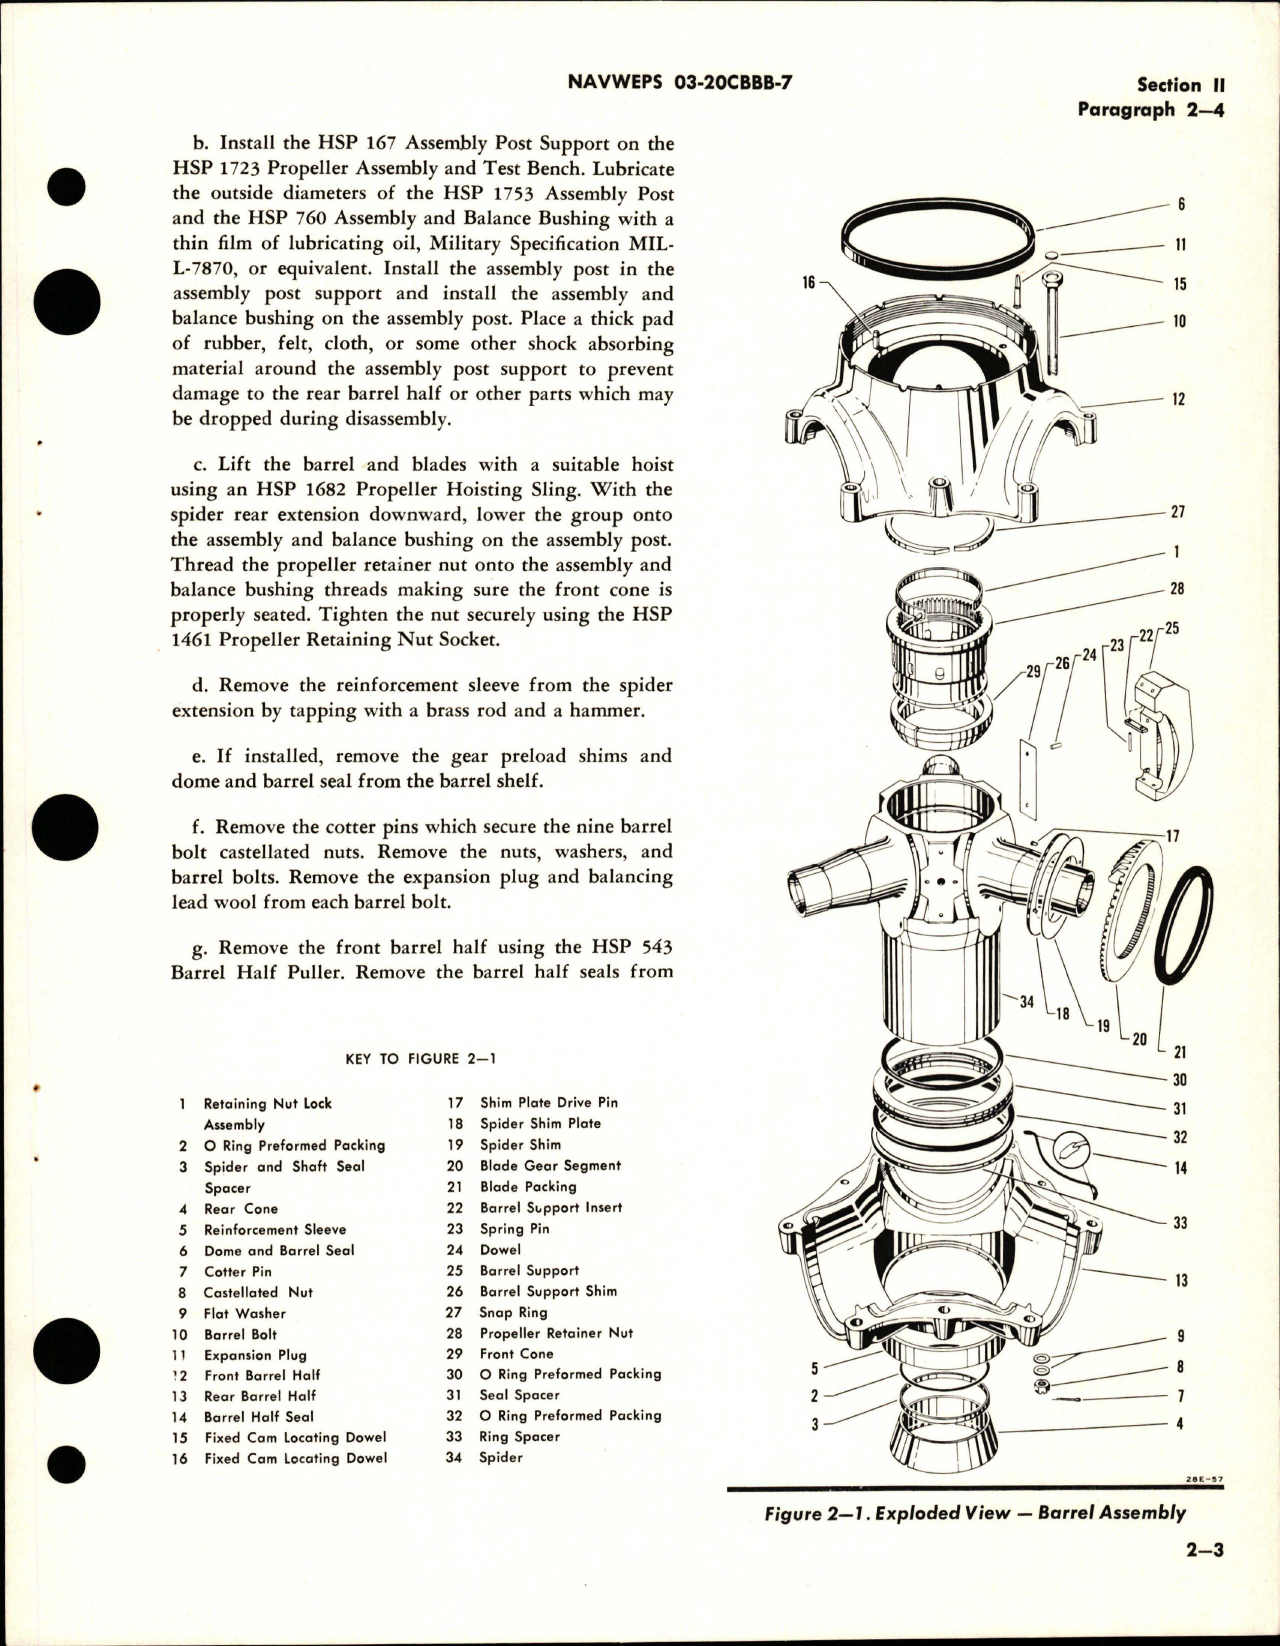 Sample page 9 from AirCorps Library document: Overhaul Instructions for Variable Pitch Aircraft Propeller - Models 43D50-311 and 43D50-321